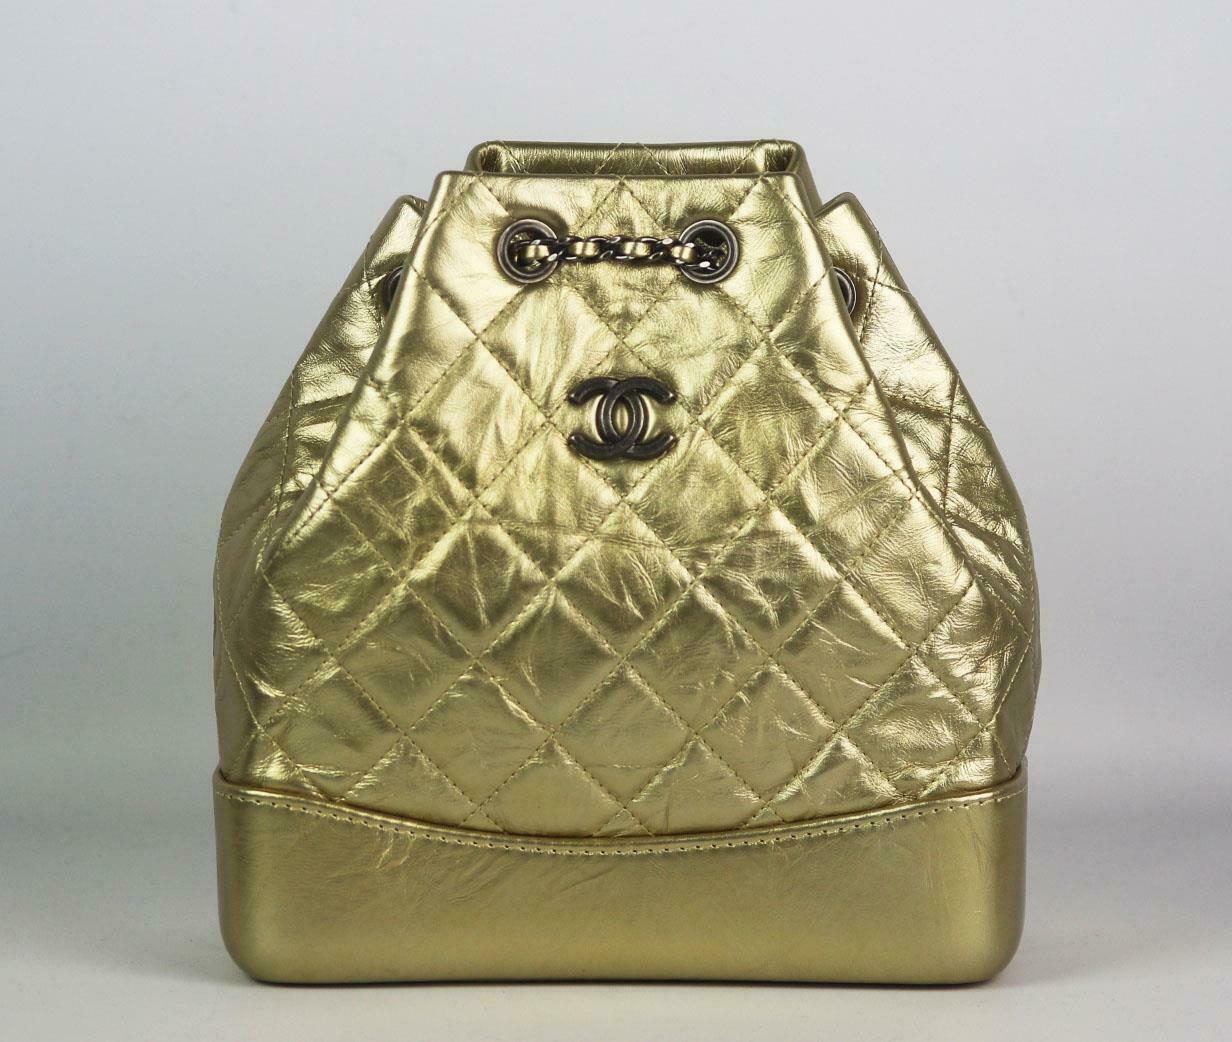 Made in Italy, this beautiful Chanel backpack has been made from gold aged calfskin exterior with red canvas interior, this piece is decorated with Chanel's antiqued-silver logo on the front and finished with a gold and antiqued silver duel chain